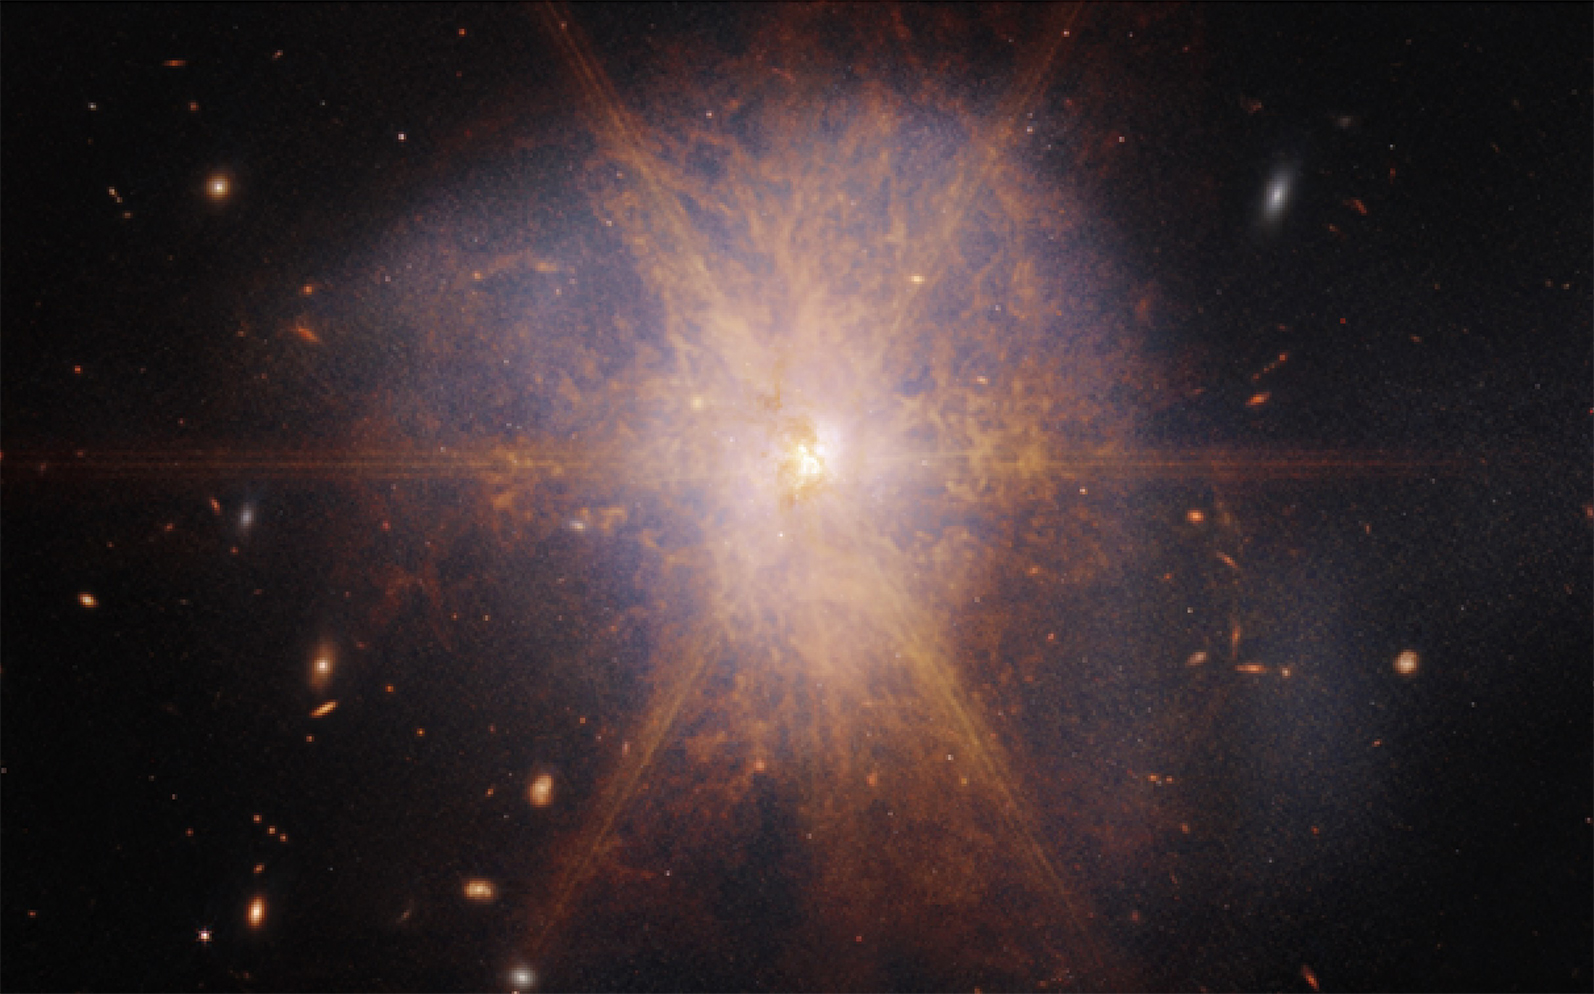 JWST observes the merging galaxies known as Arp 220 located around 250 million light-years from Earth.